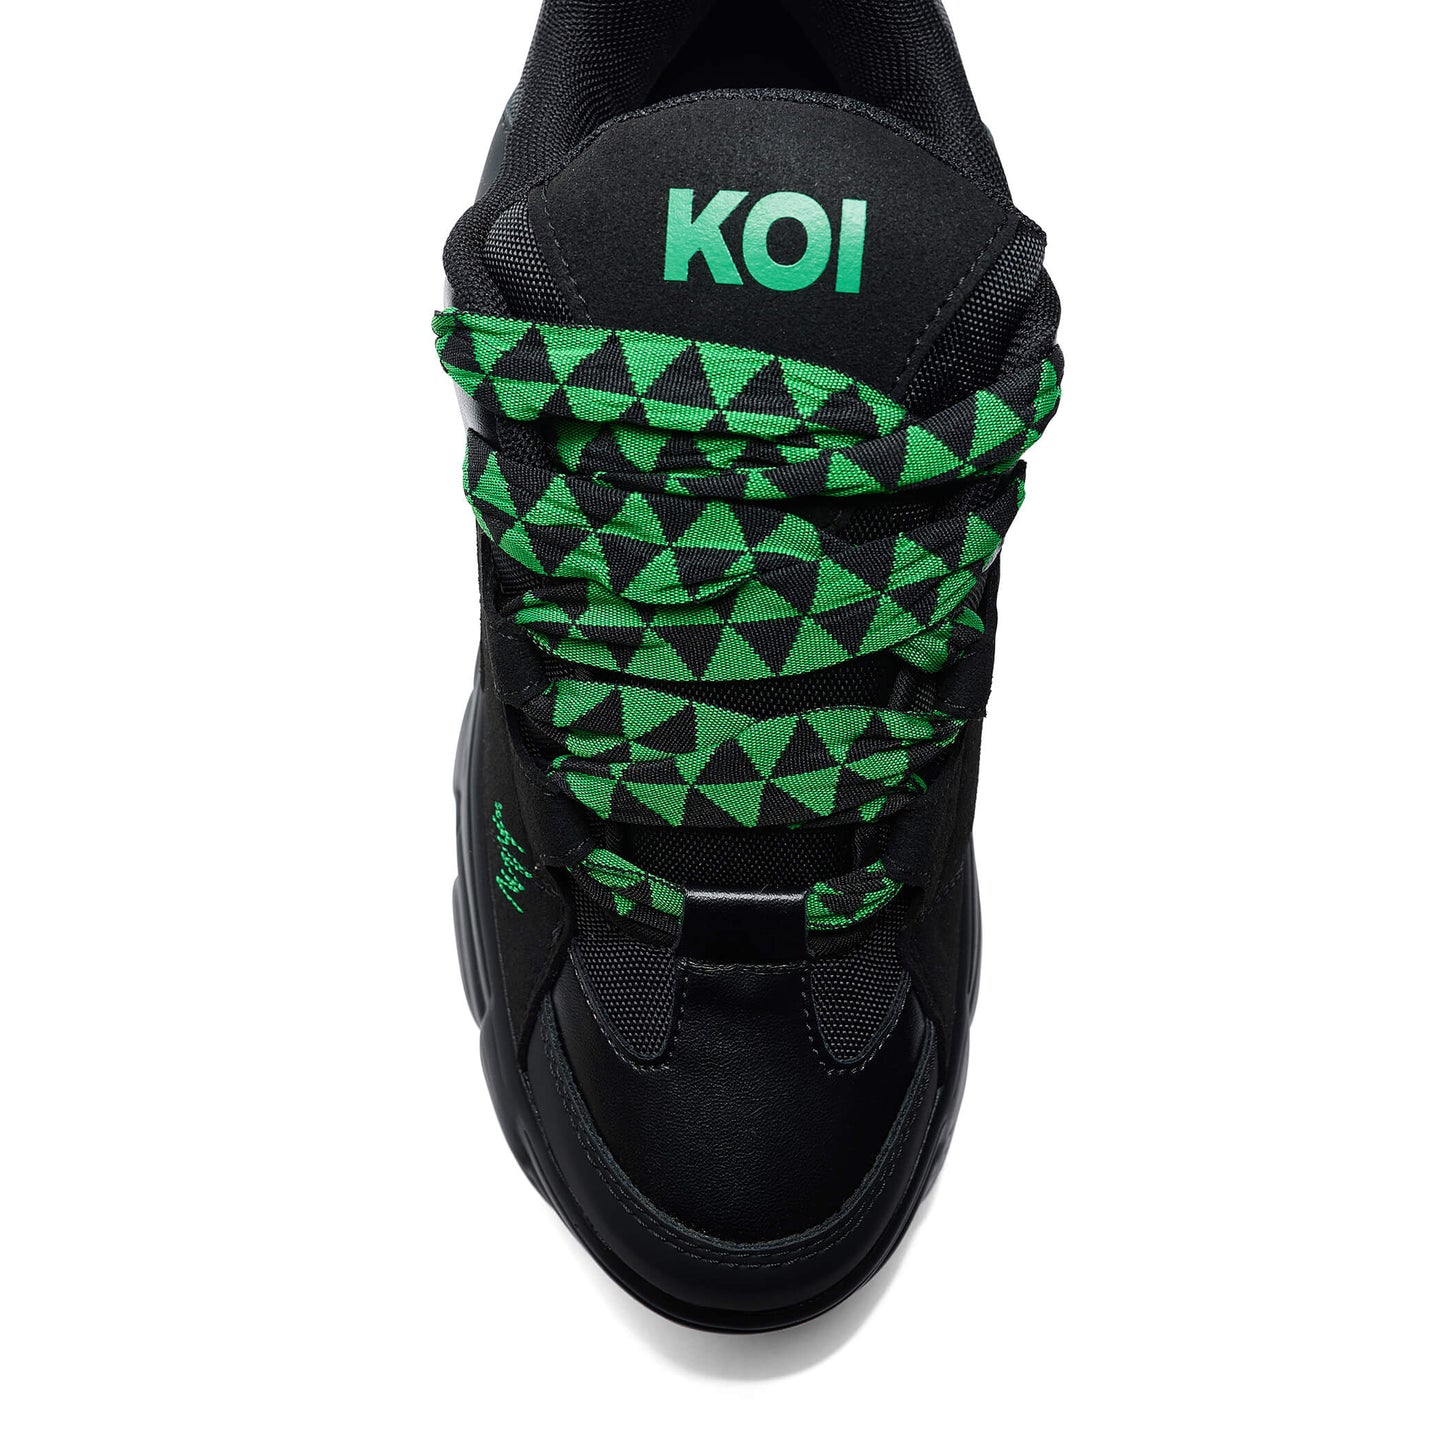 Ricta Flip Chunky Trainers - Green Lace - Trainers - KOI Footwear - Black - Top View